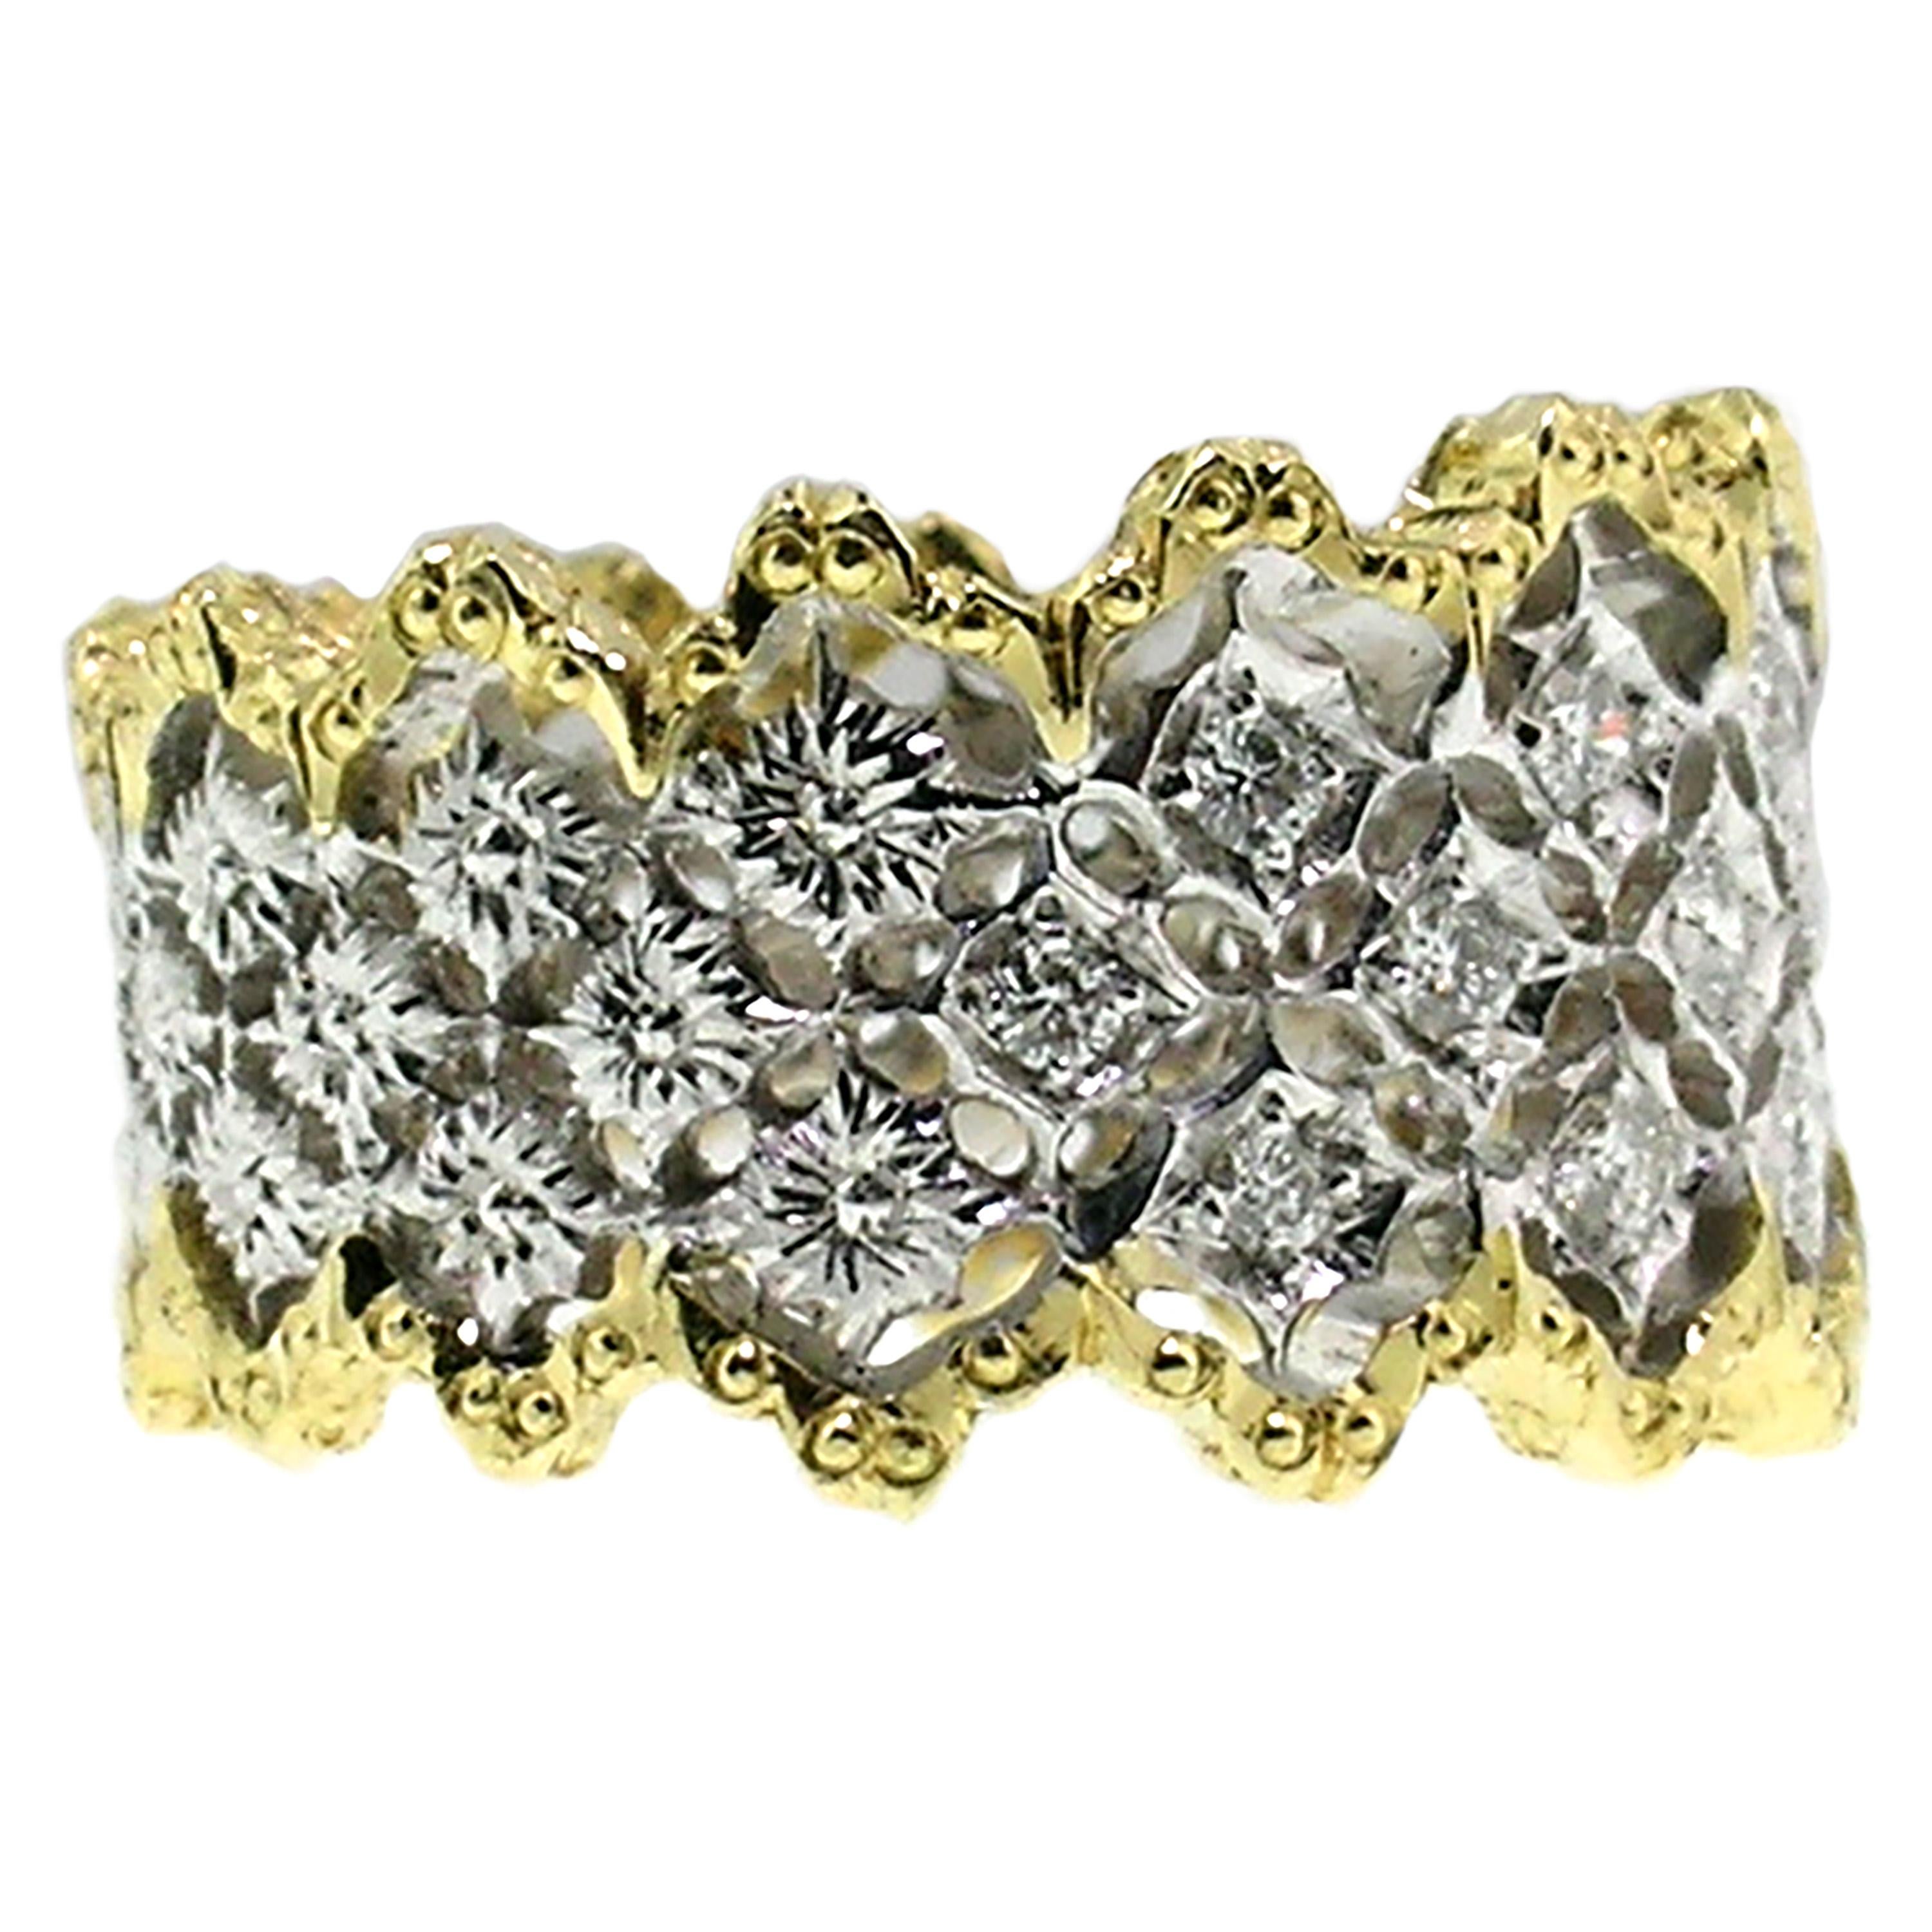 The Caprice band is high impact in the most refined way possible. This wide band with crenulated edges commands attention, but the lacy presentation of gold and diamonds keeps the style airy and light.

This particular version of this ring is